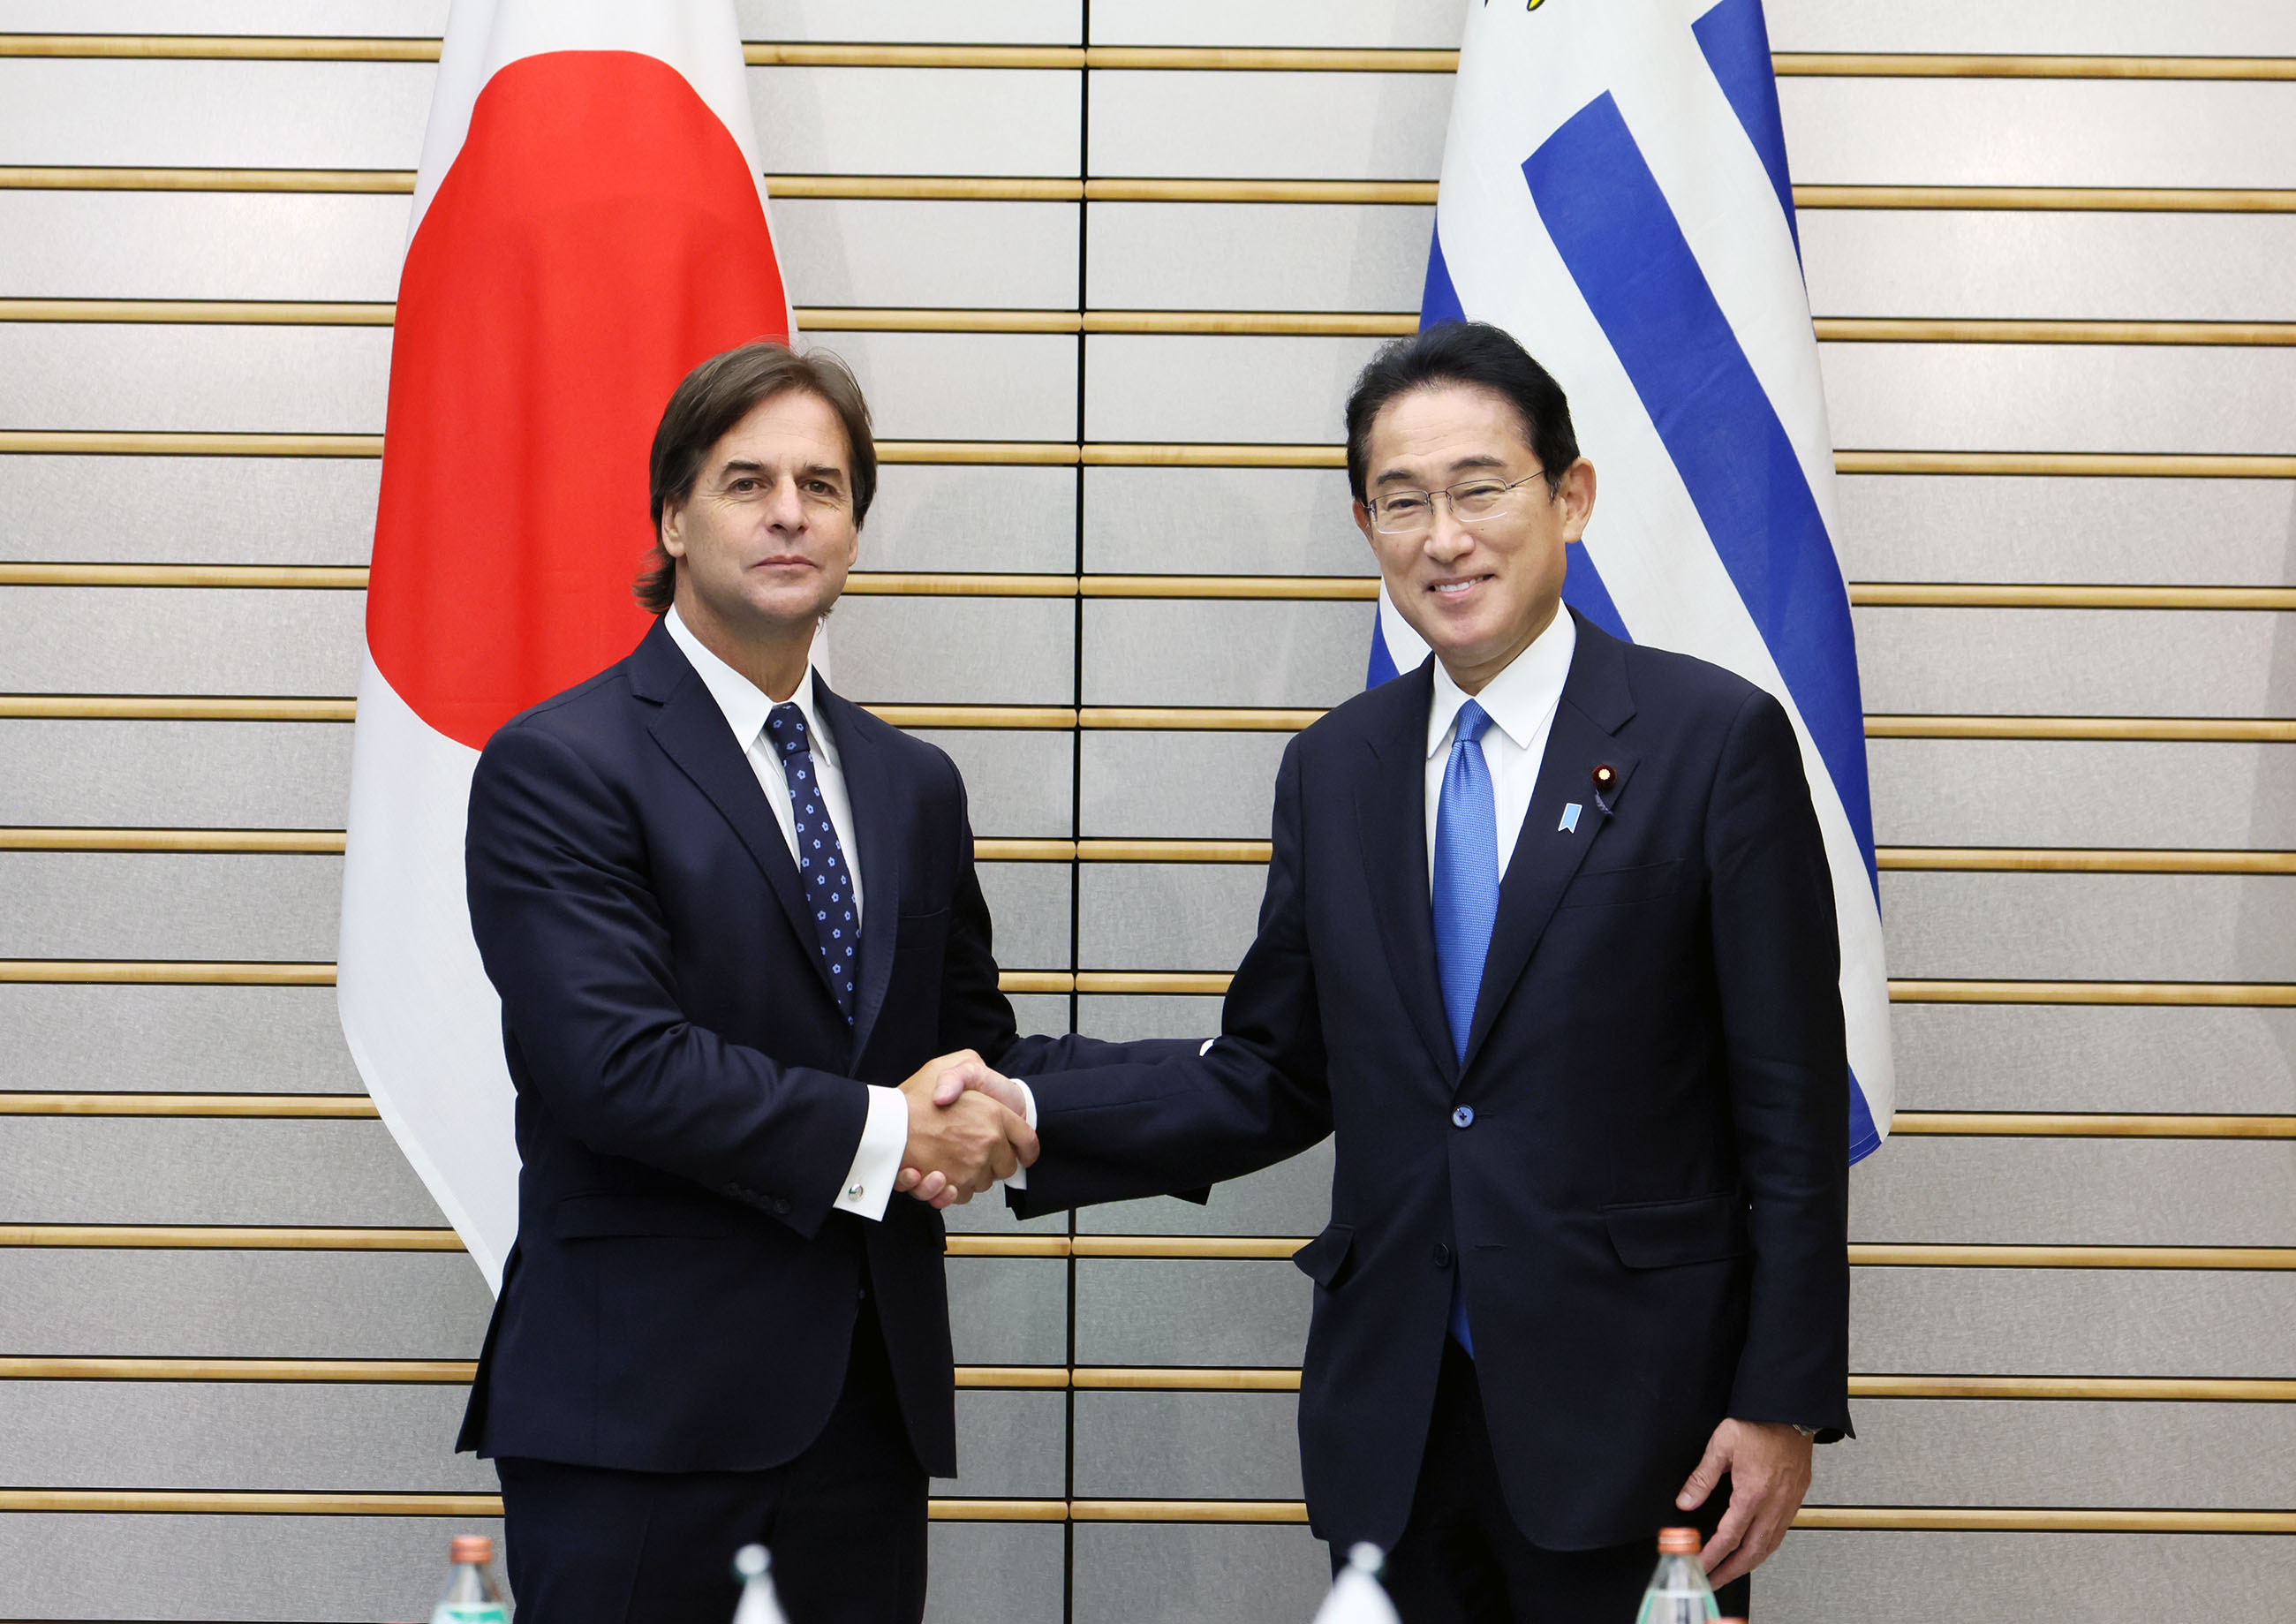 Japan-Uruguay Summit Meeting and Other Events